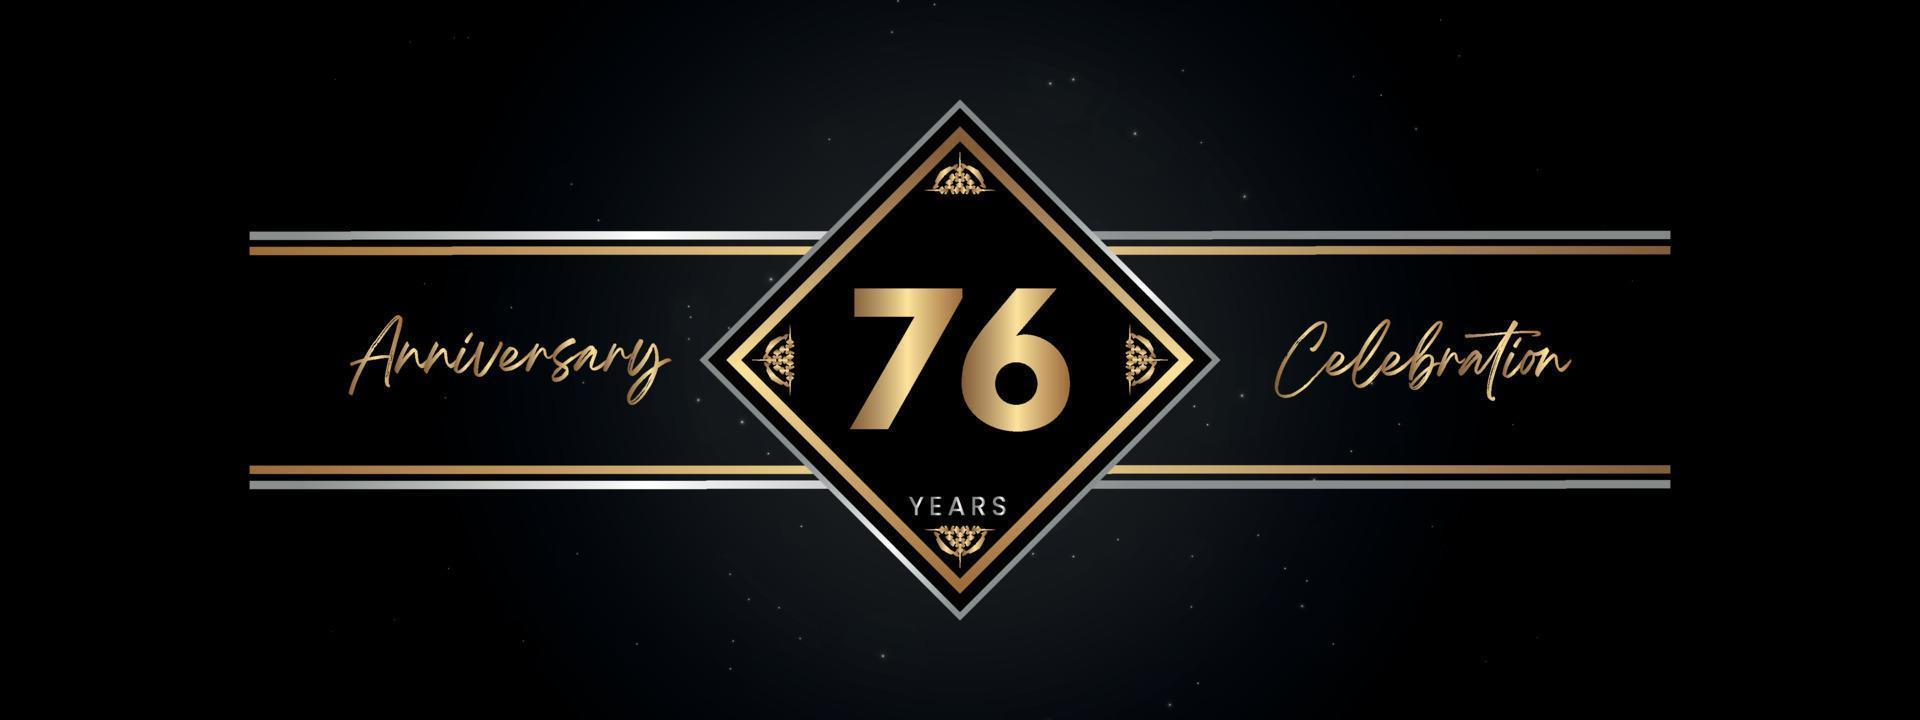 76 years anniversary golden color with decorative frame isolated on black background for anniversary celebration event, birthday party, brochure, greeting card. 76 Year Anniversary Template Design vector